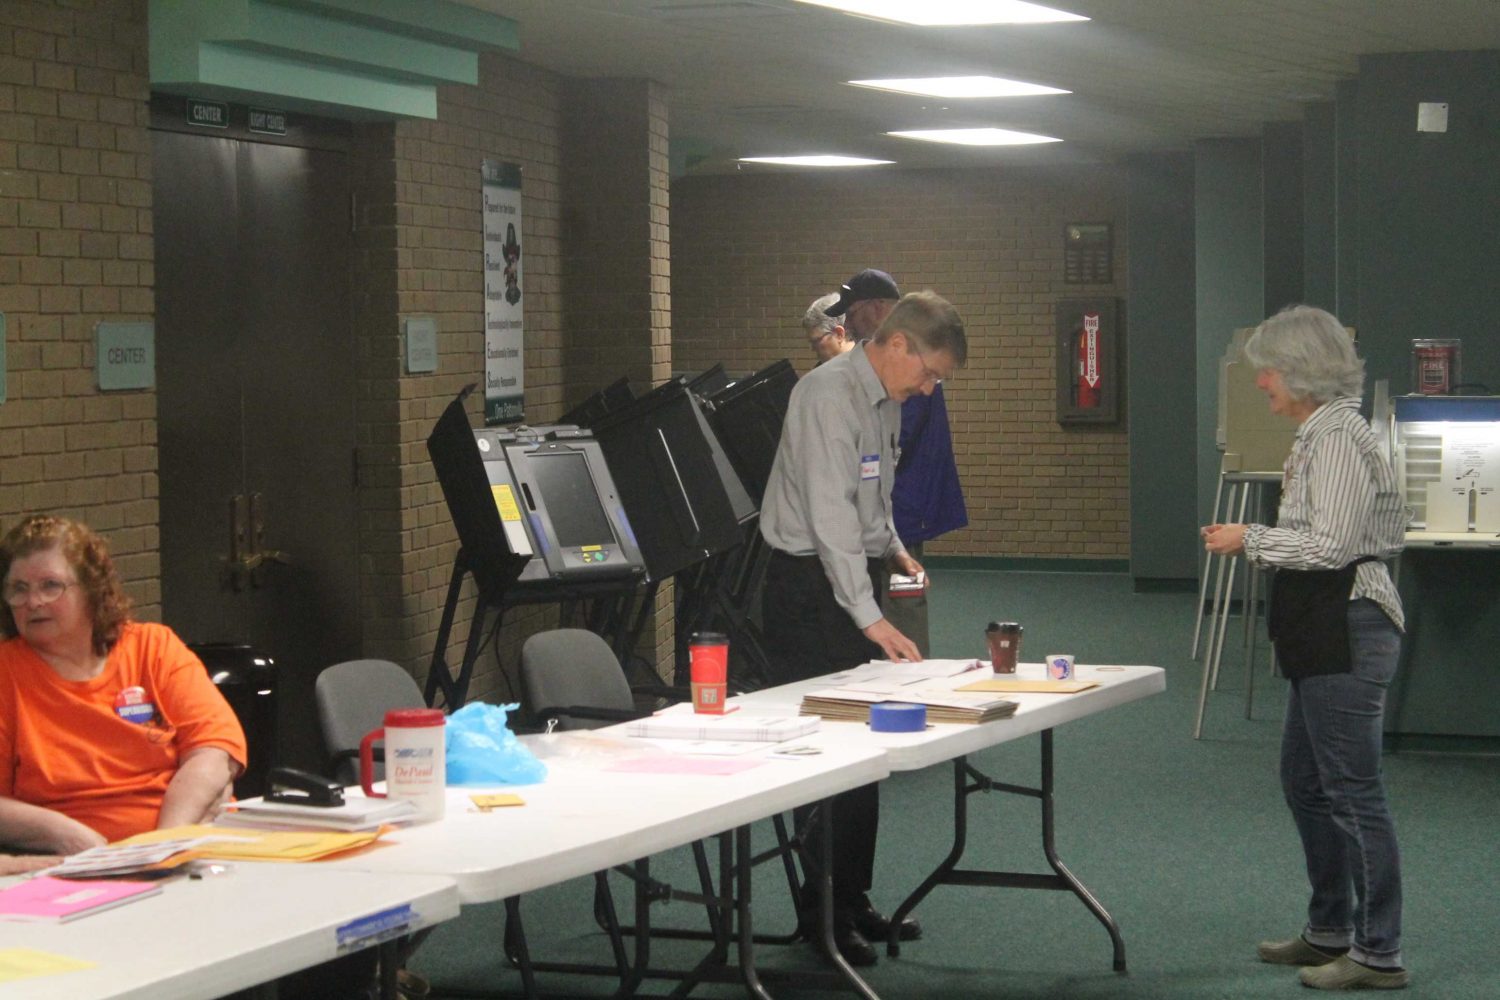 Four candidates up for election to Pattonville school board, three to be elected